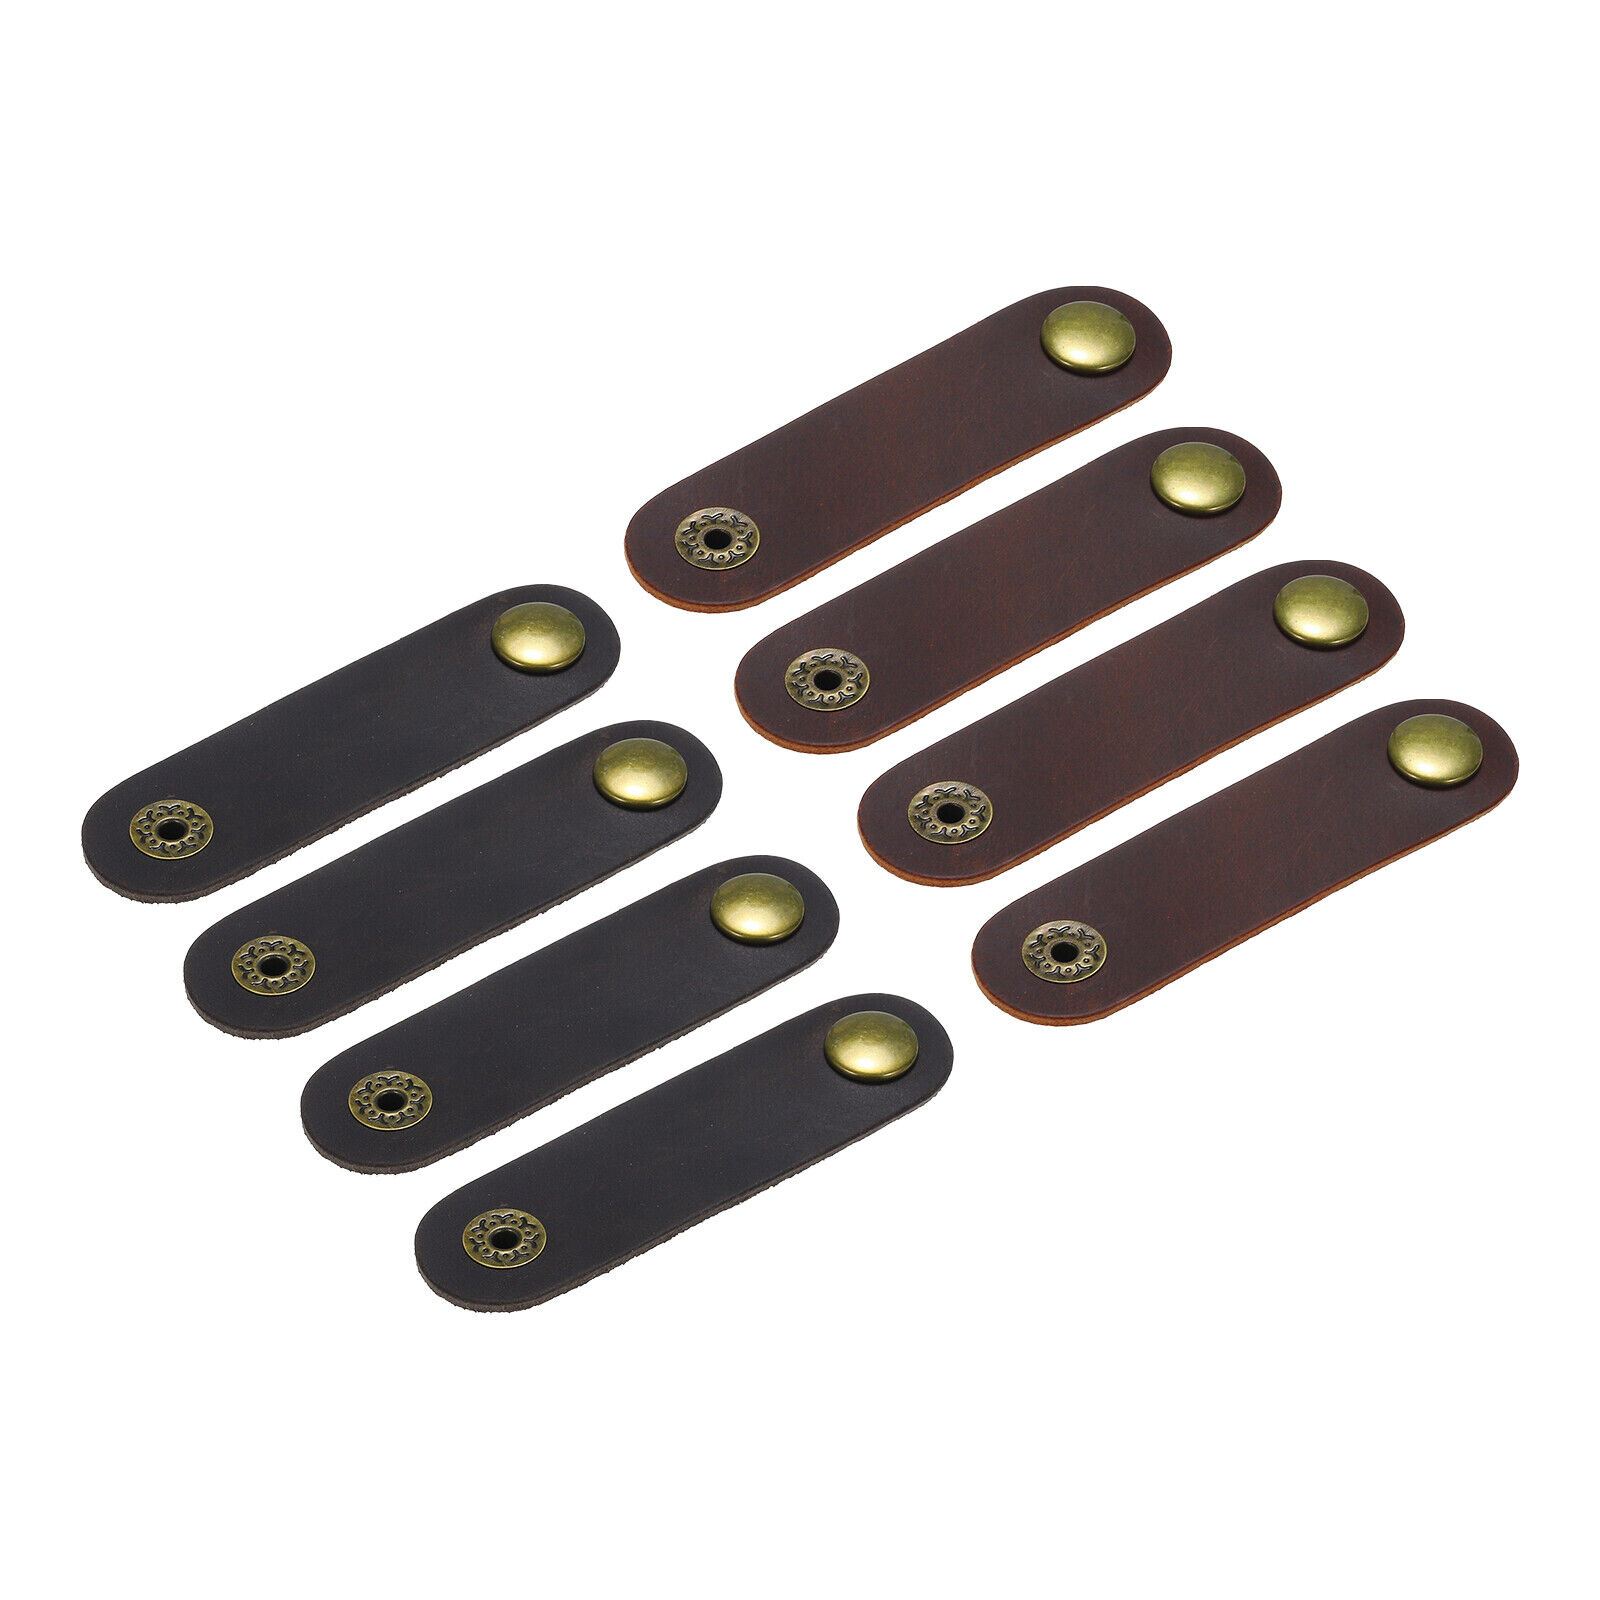 8Pcs Leather Cable Straps Cord Organizer Cable Tie Portable Deep Brown/Red Brown